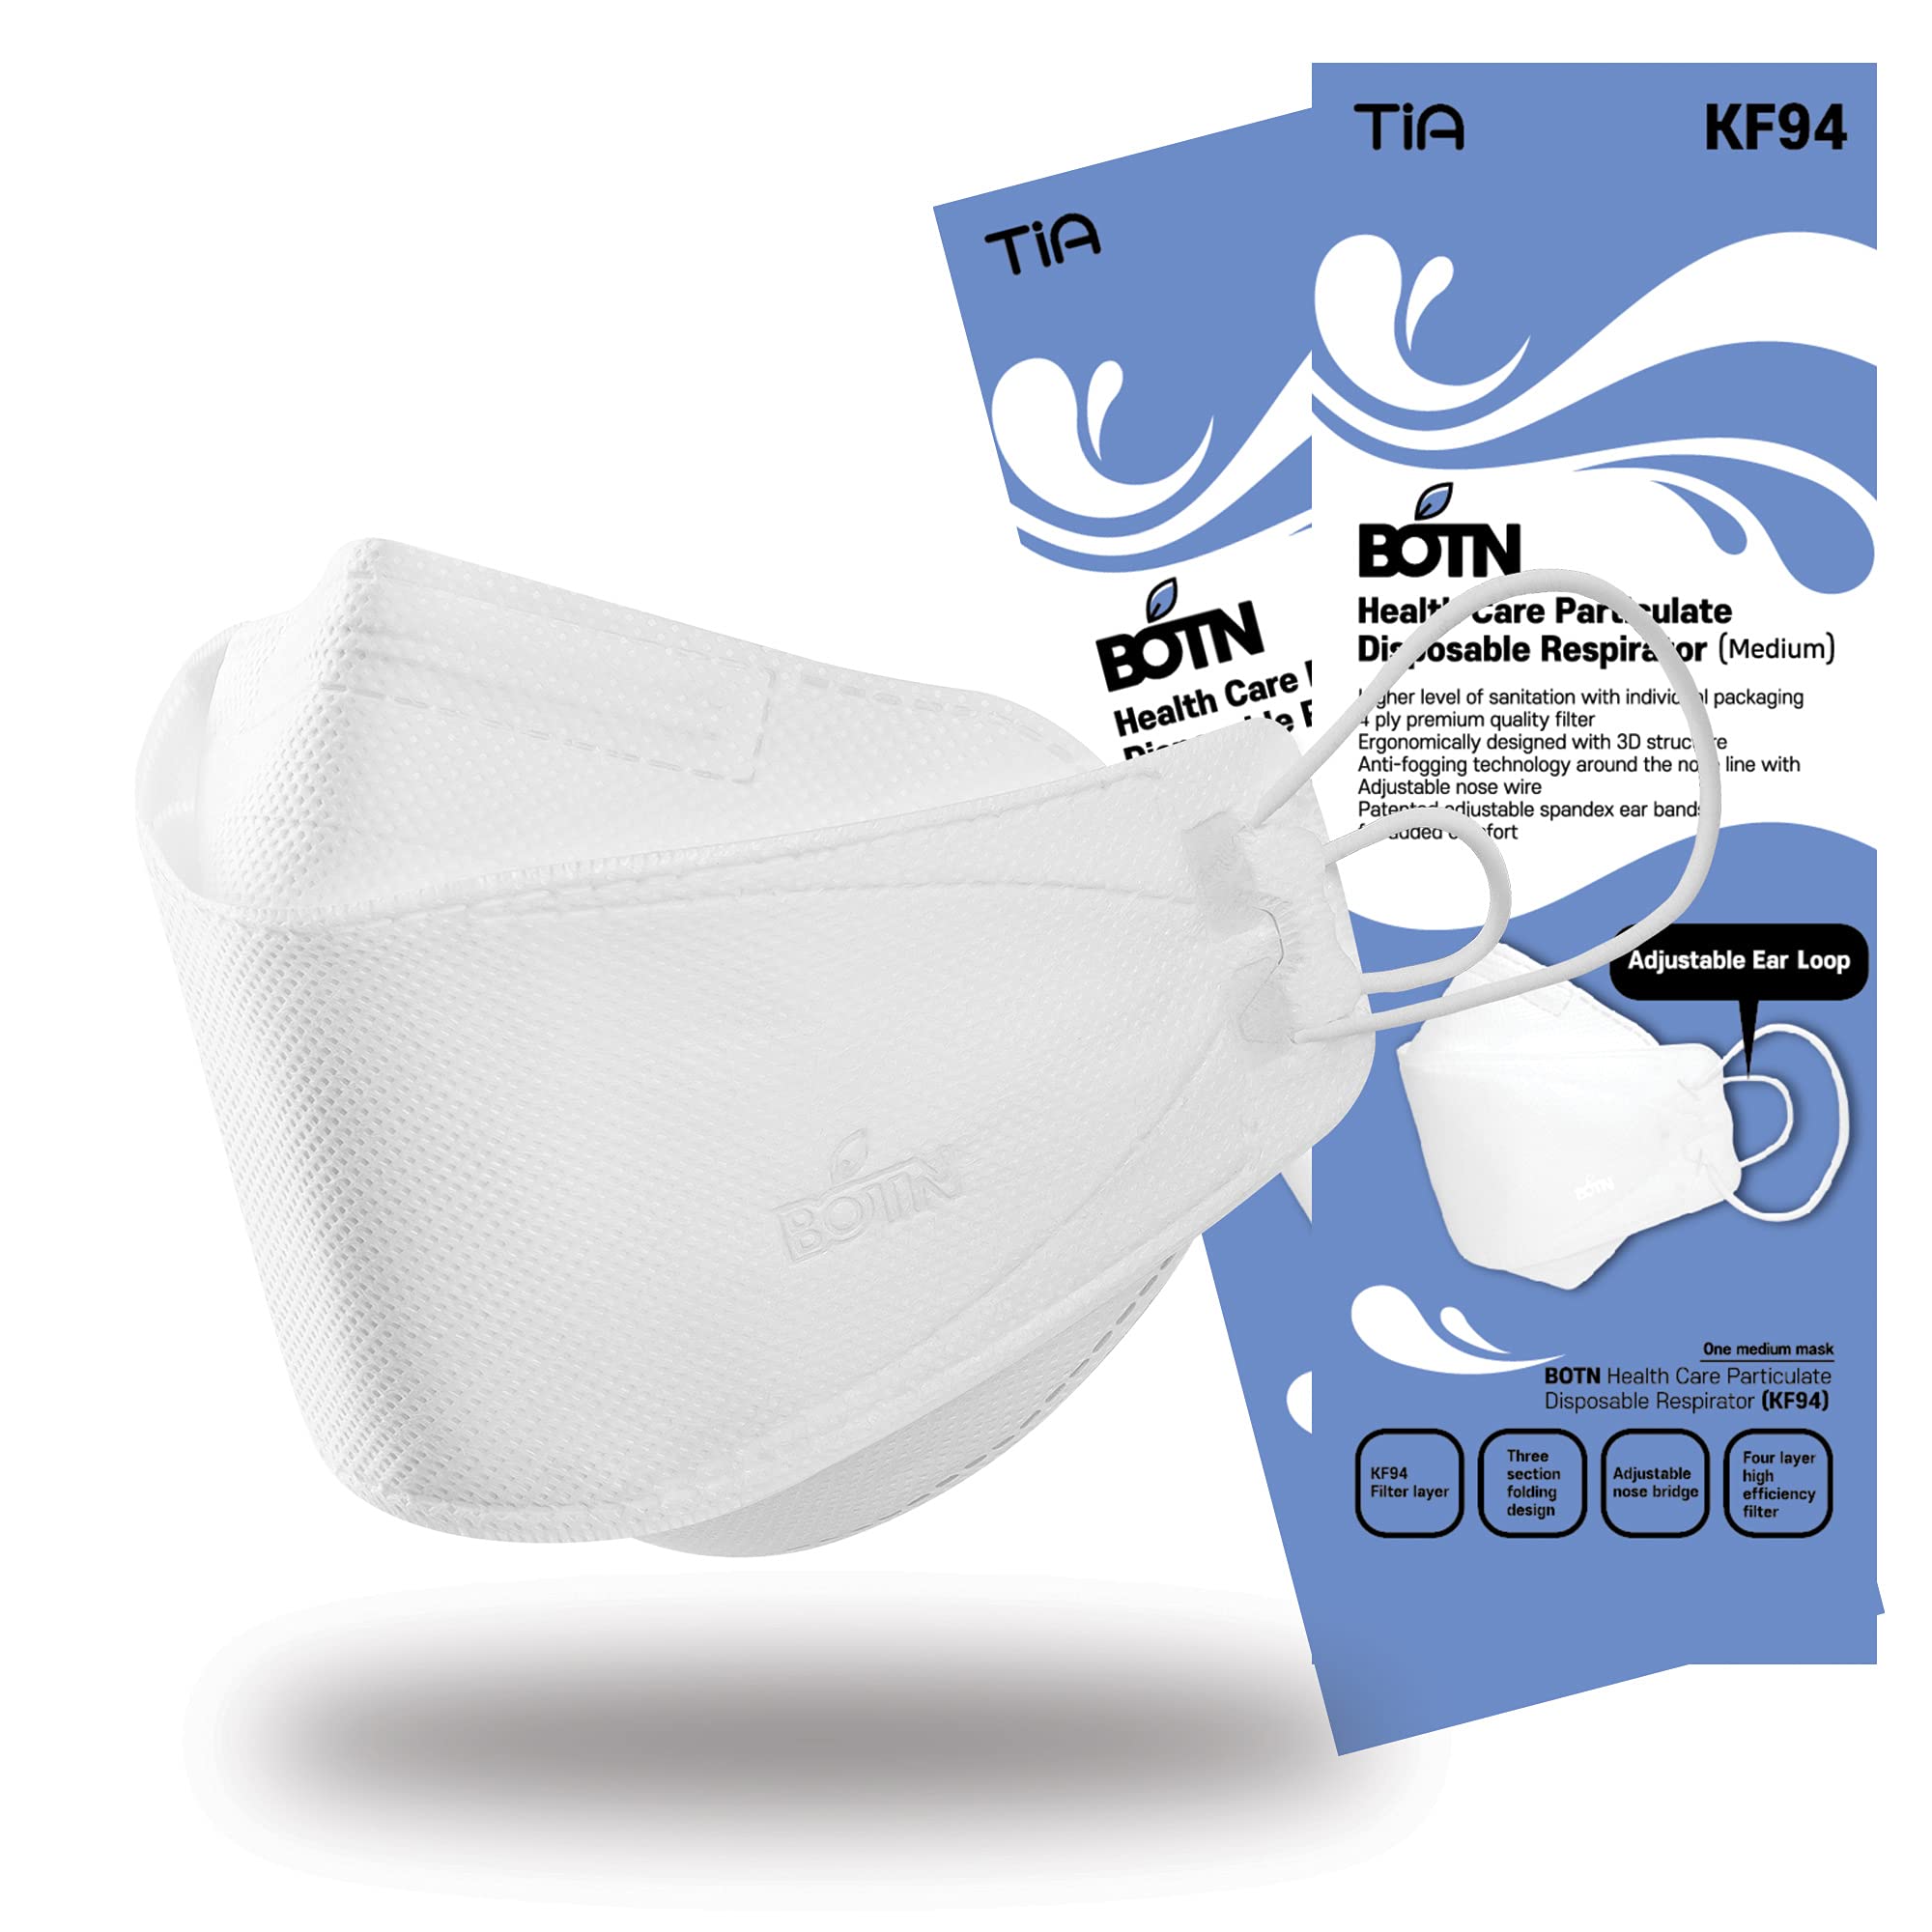 BOTN youth fit 23Pack KF94 Protective and Safety Face Mask, Adjustable Strap and Made in Korea, 4-Layer Filter and 3D Design (White, Medium)